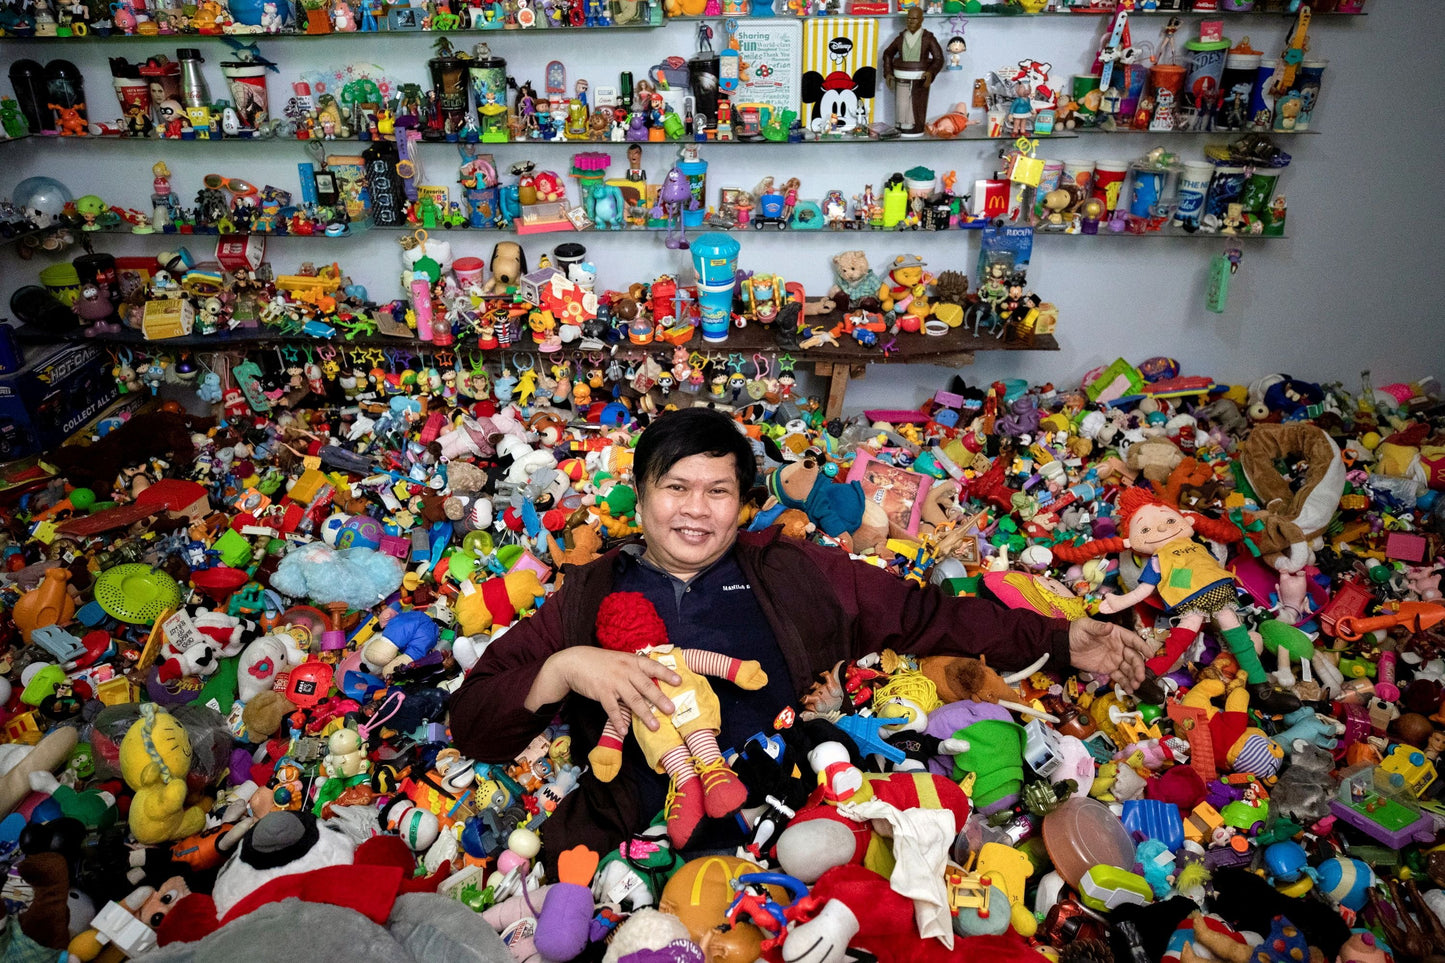 How to deal with excessive toys? 5 tips for parents to reduce toys clutter